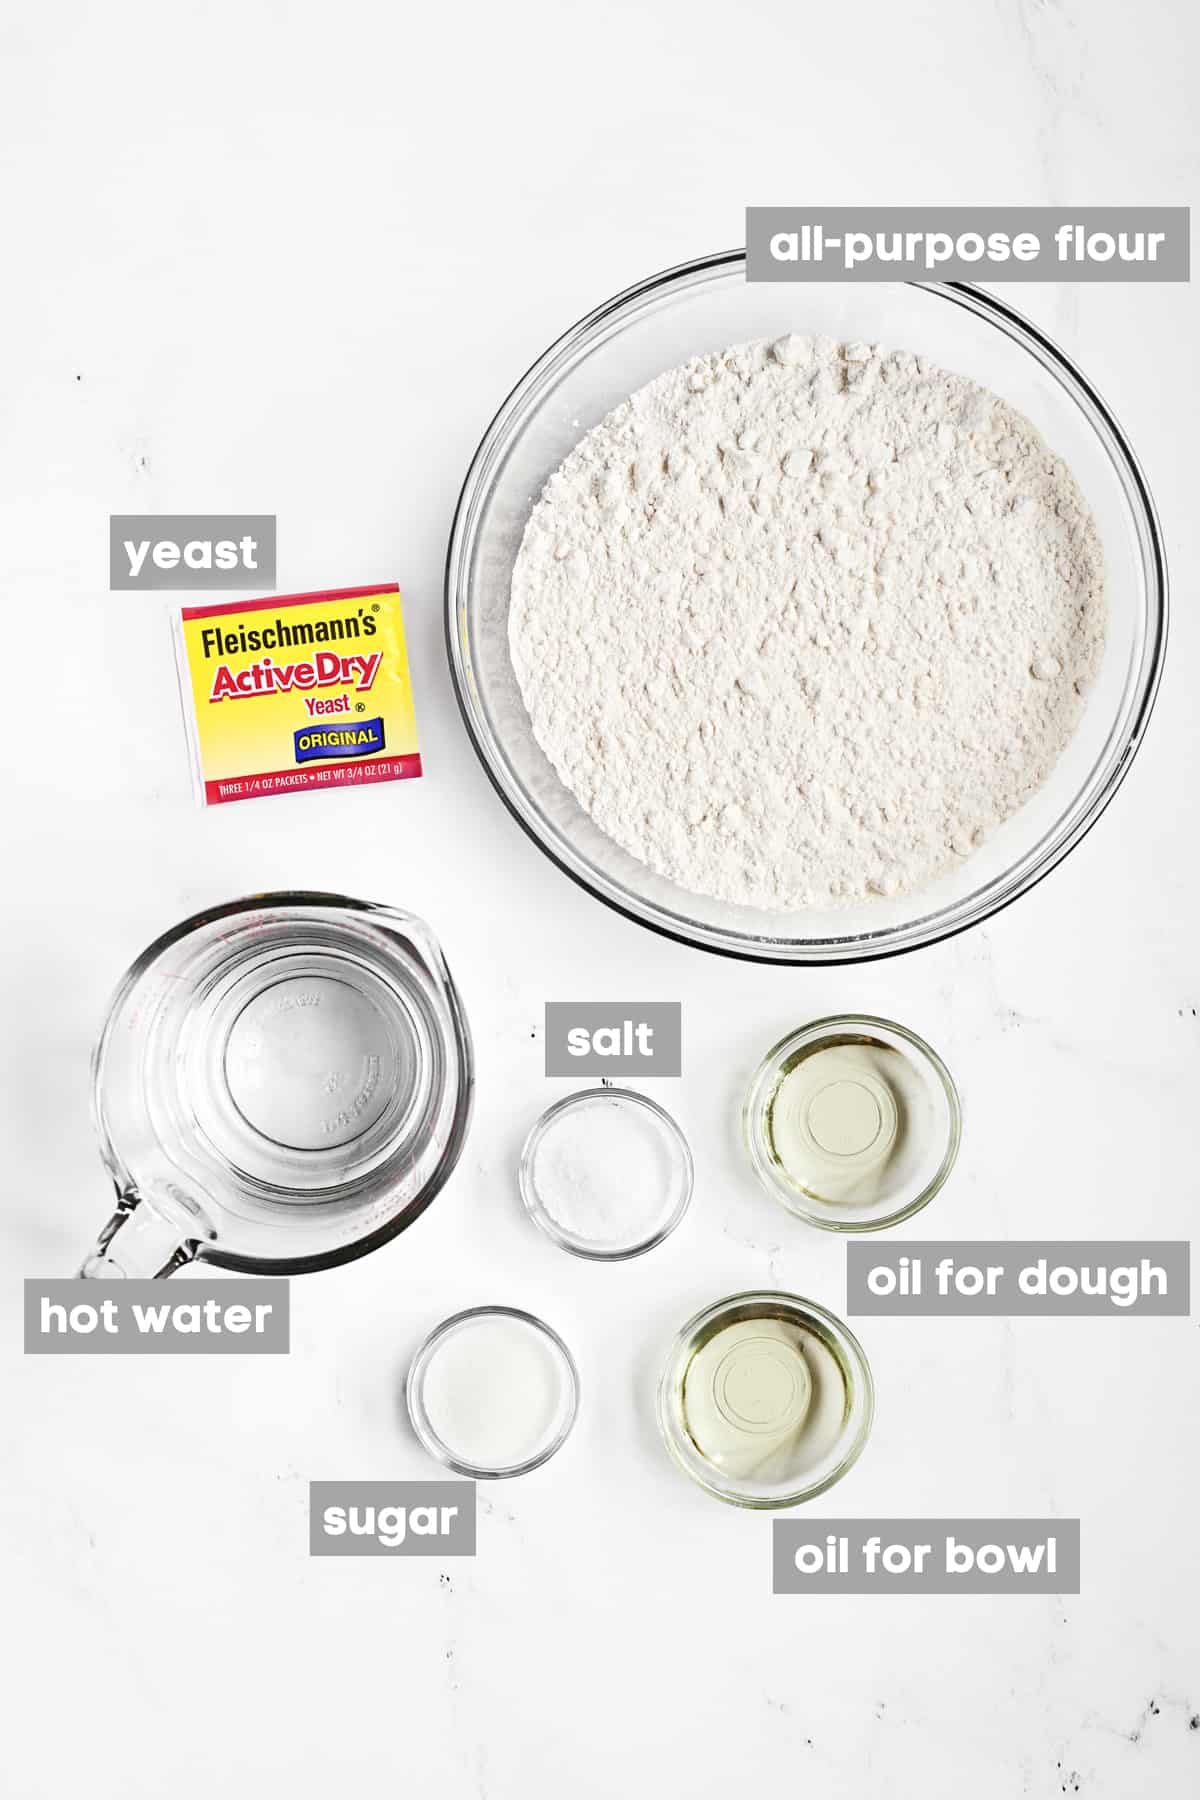 Ingredients set out on a countertop.